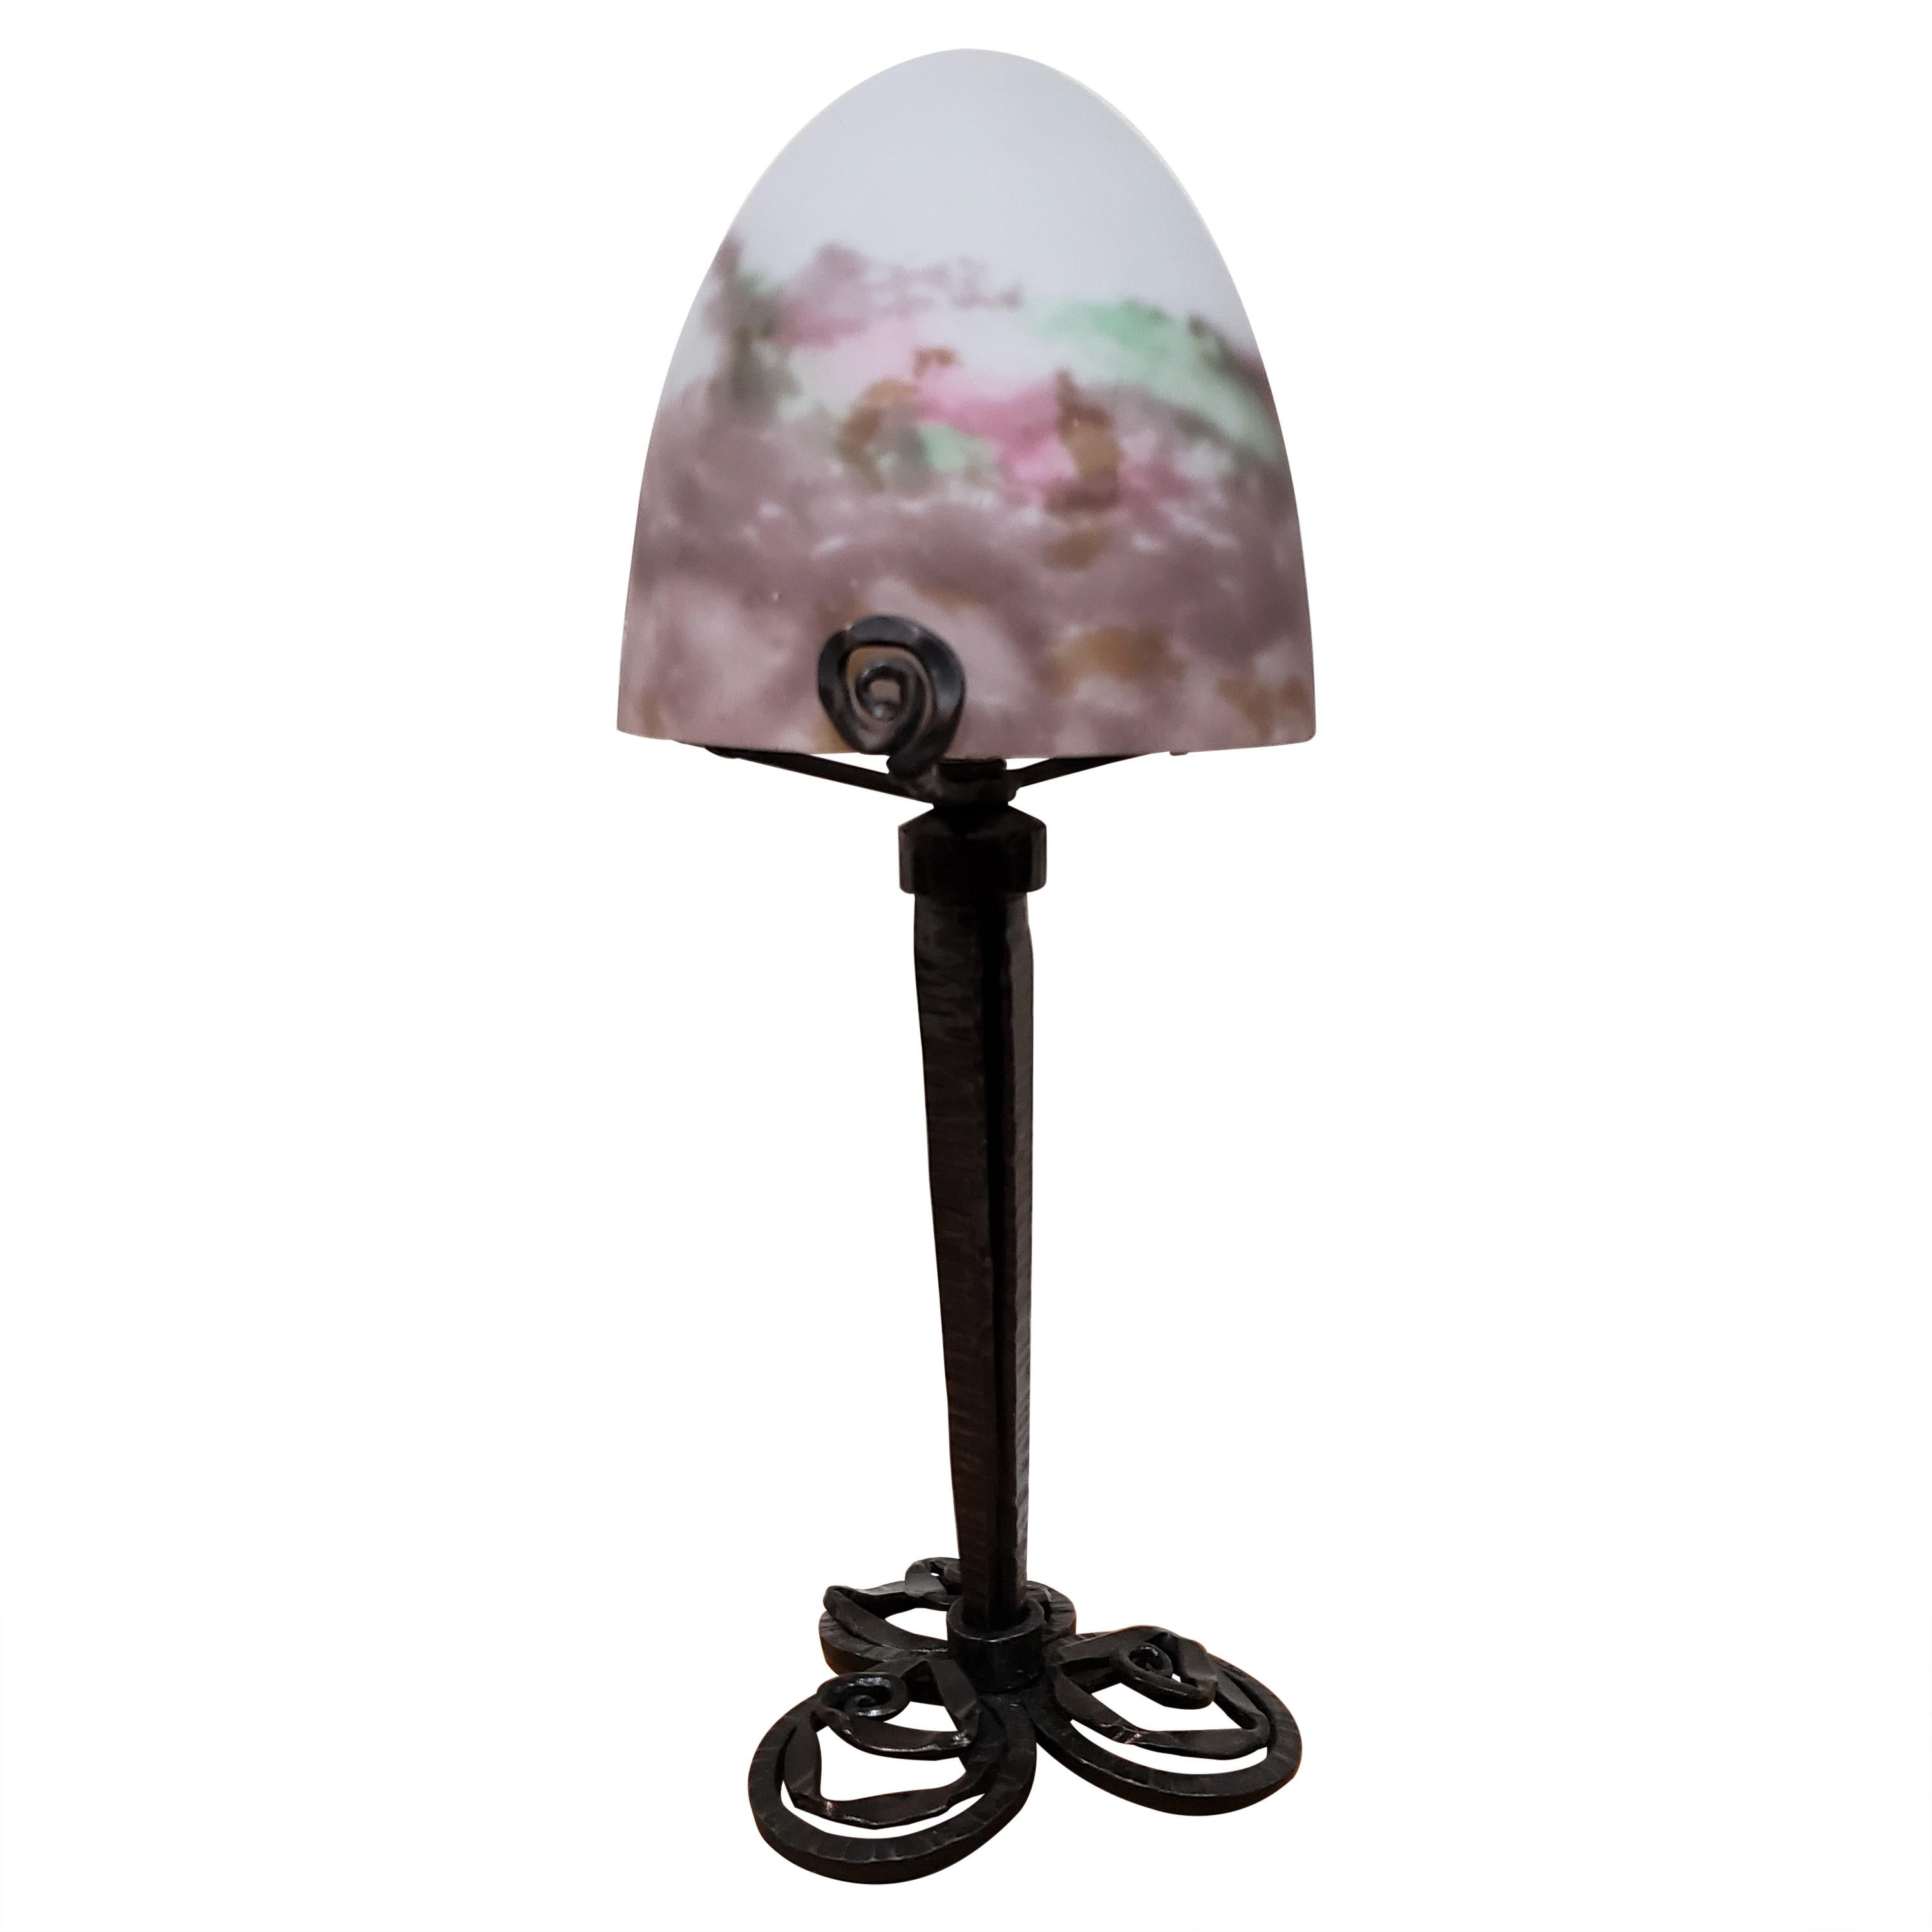 Muller Freres French Art Deco Table Lamp